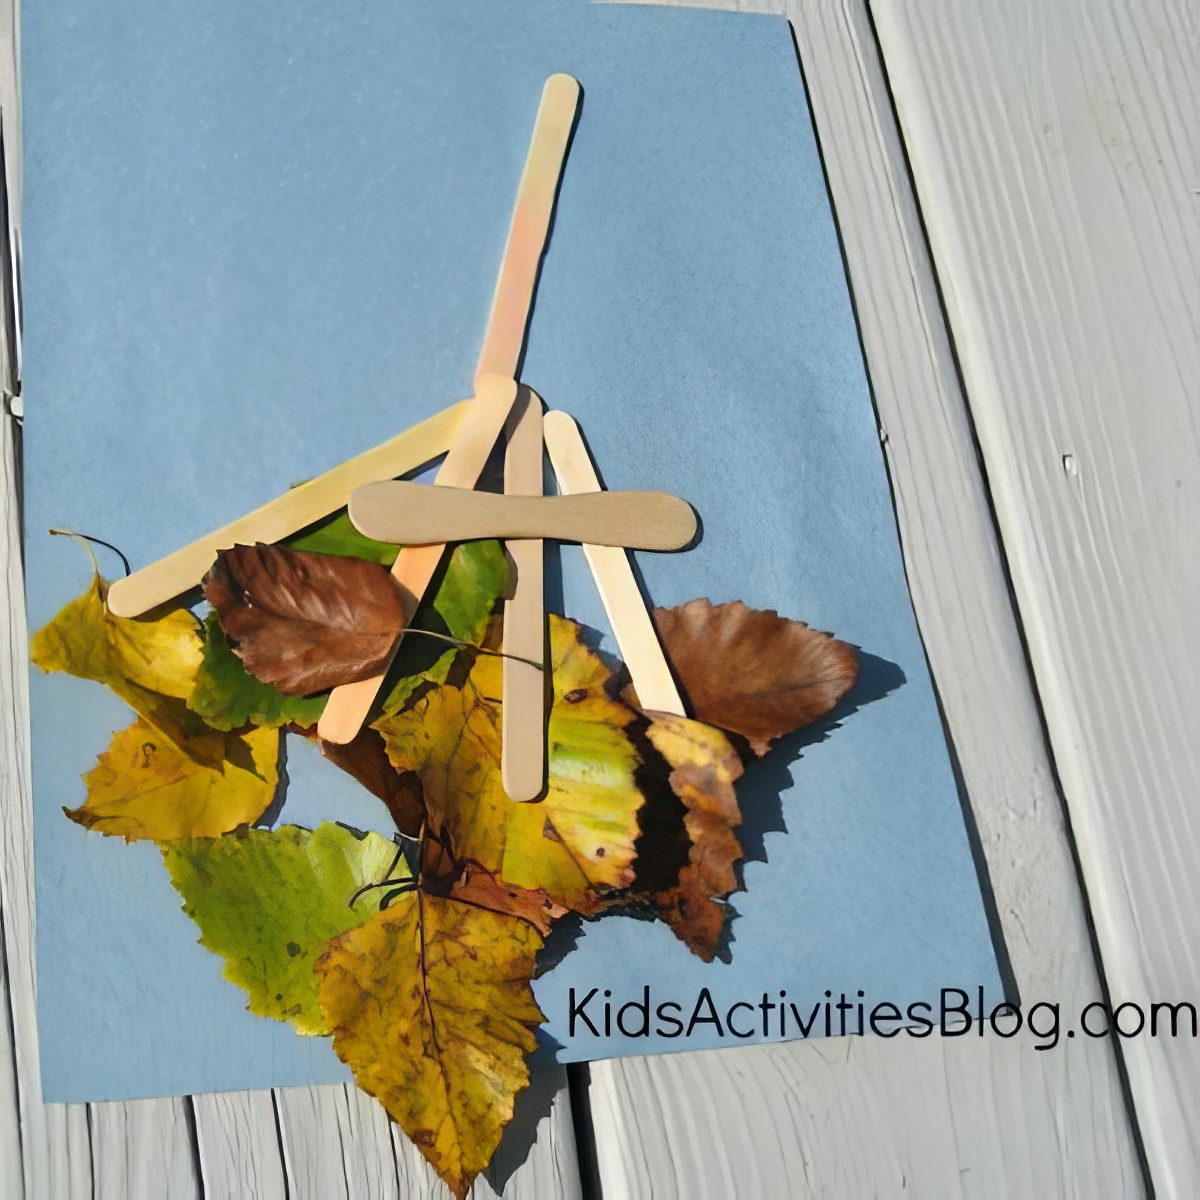 kidsactivitiesblog_leafrakecraft, 13-leafy-crafts-and-activities-for-kids, creative leaf crafts for kids